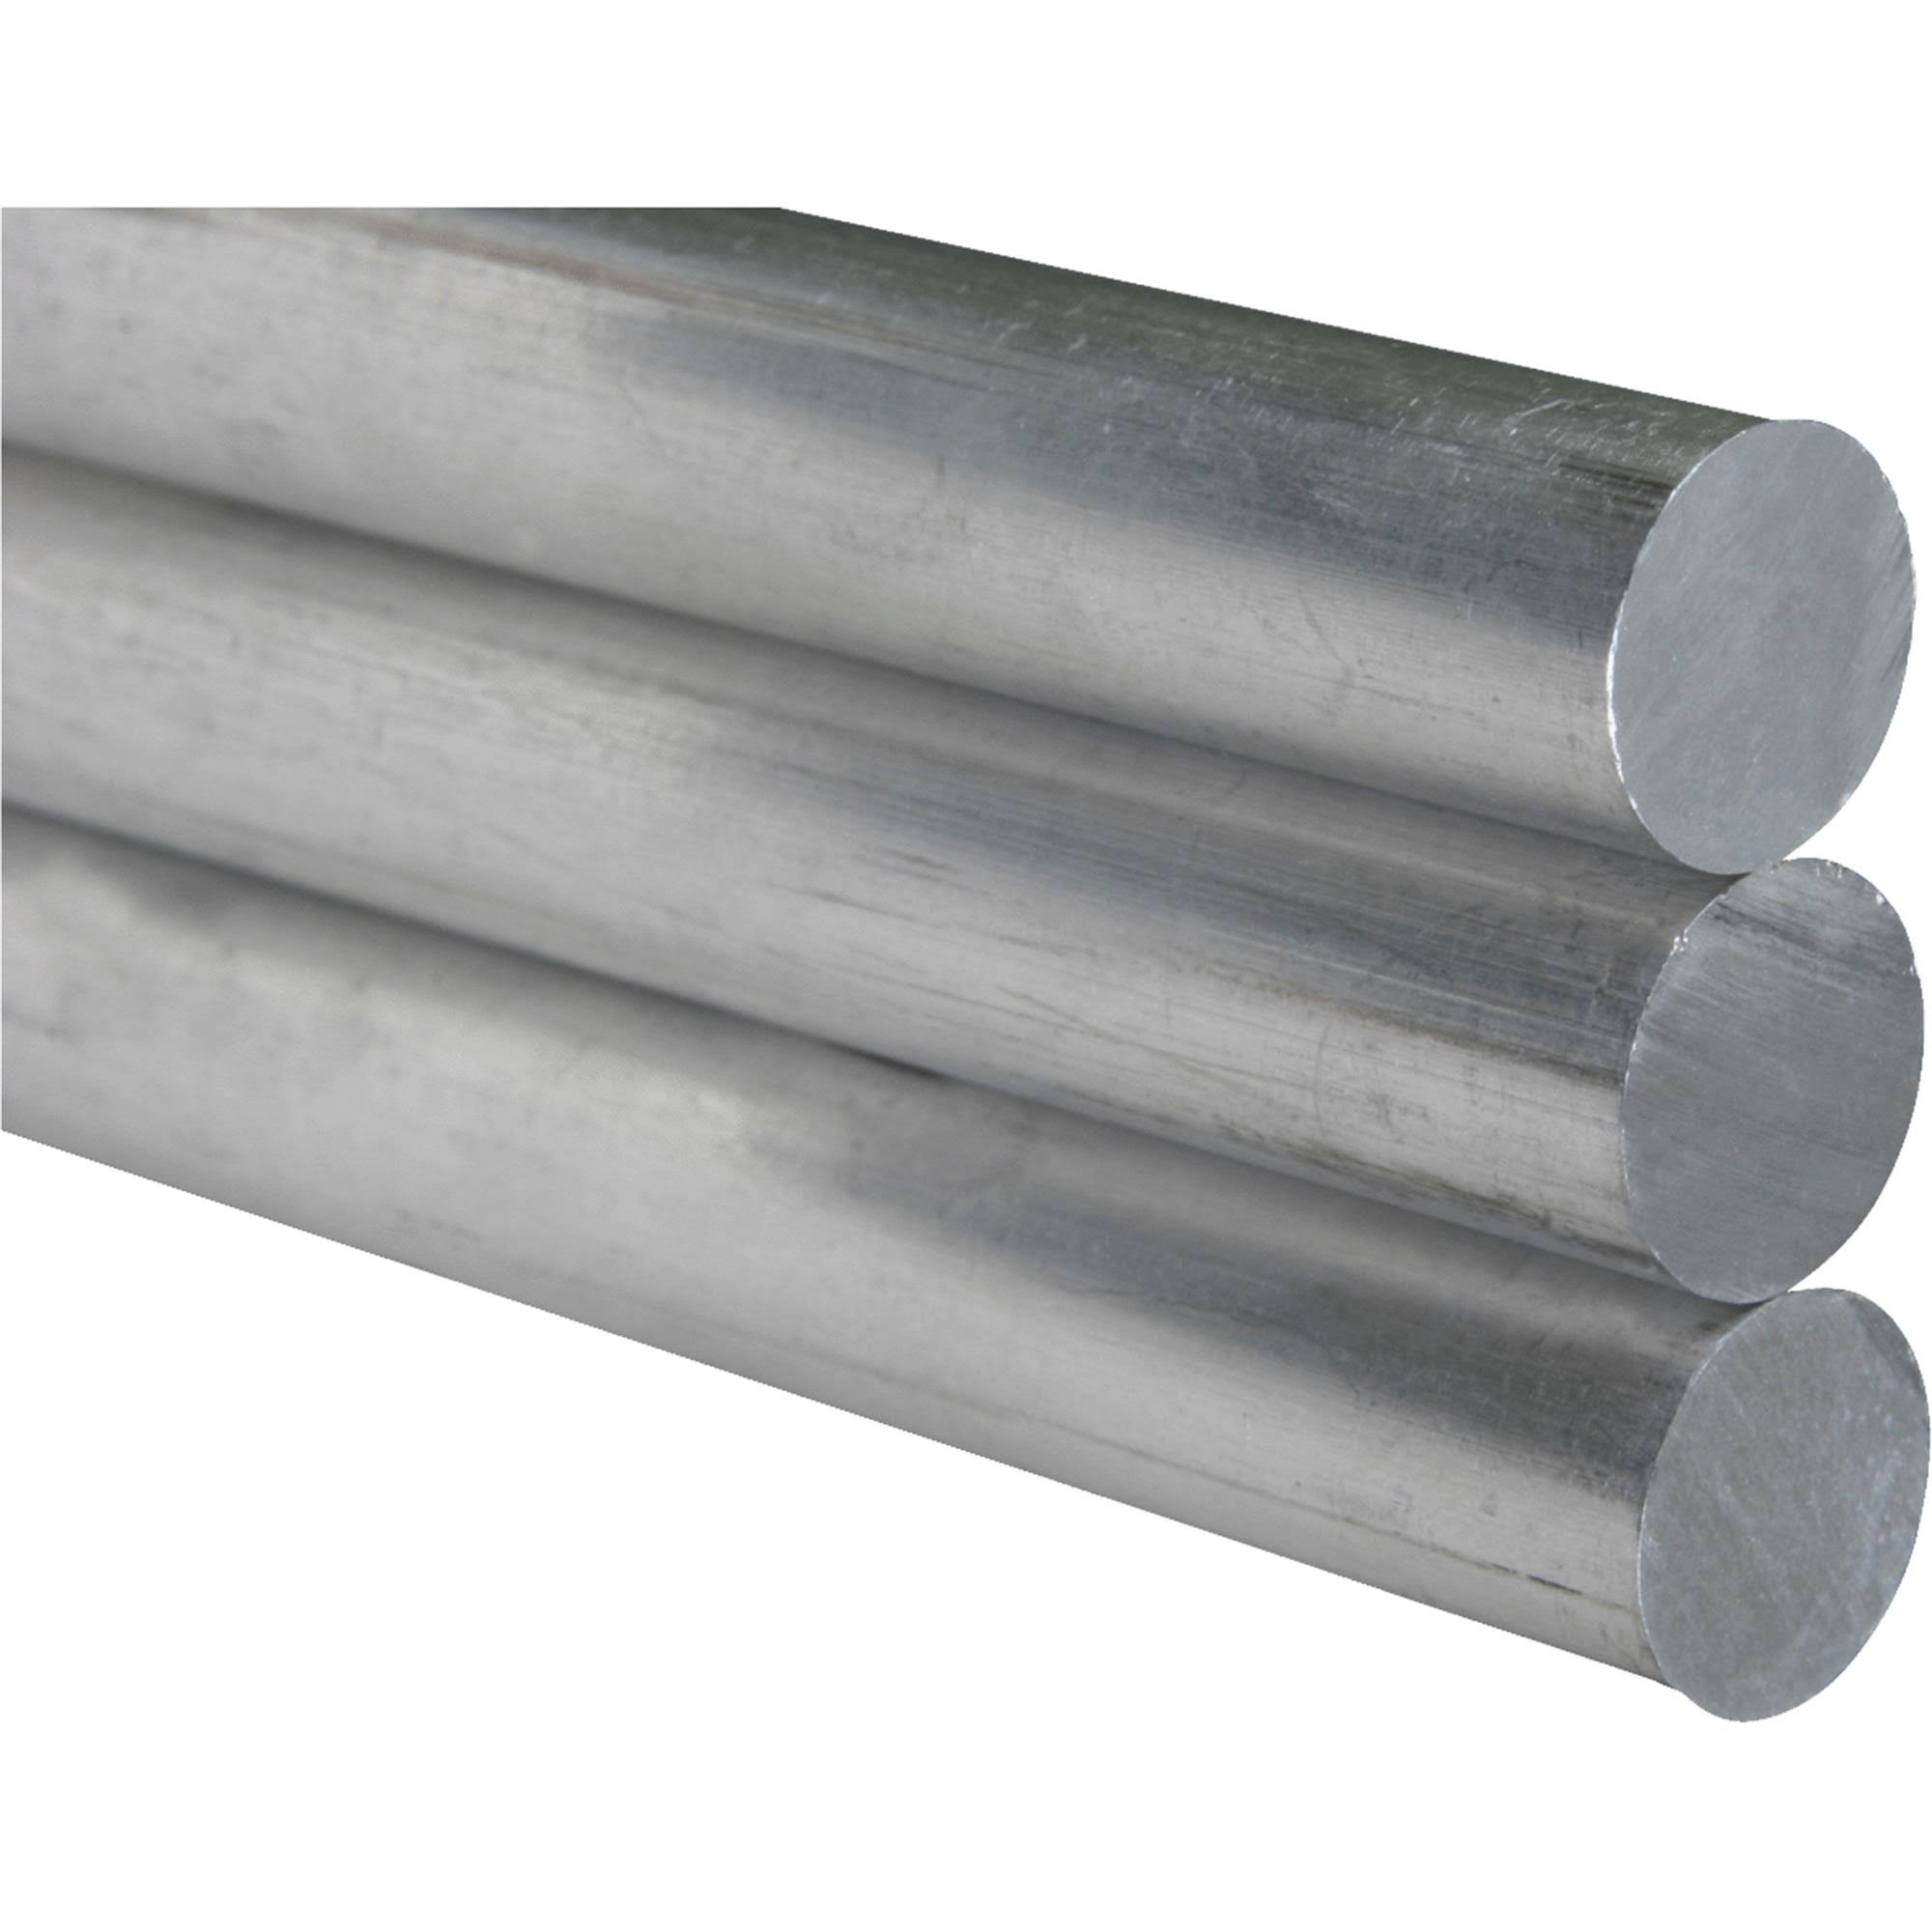 K&S Round Stainless Steel Rod - 3/32in x 12in